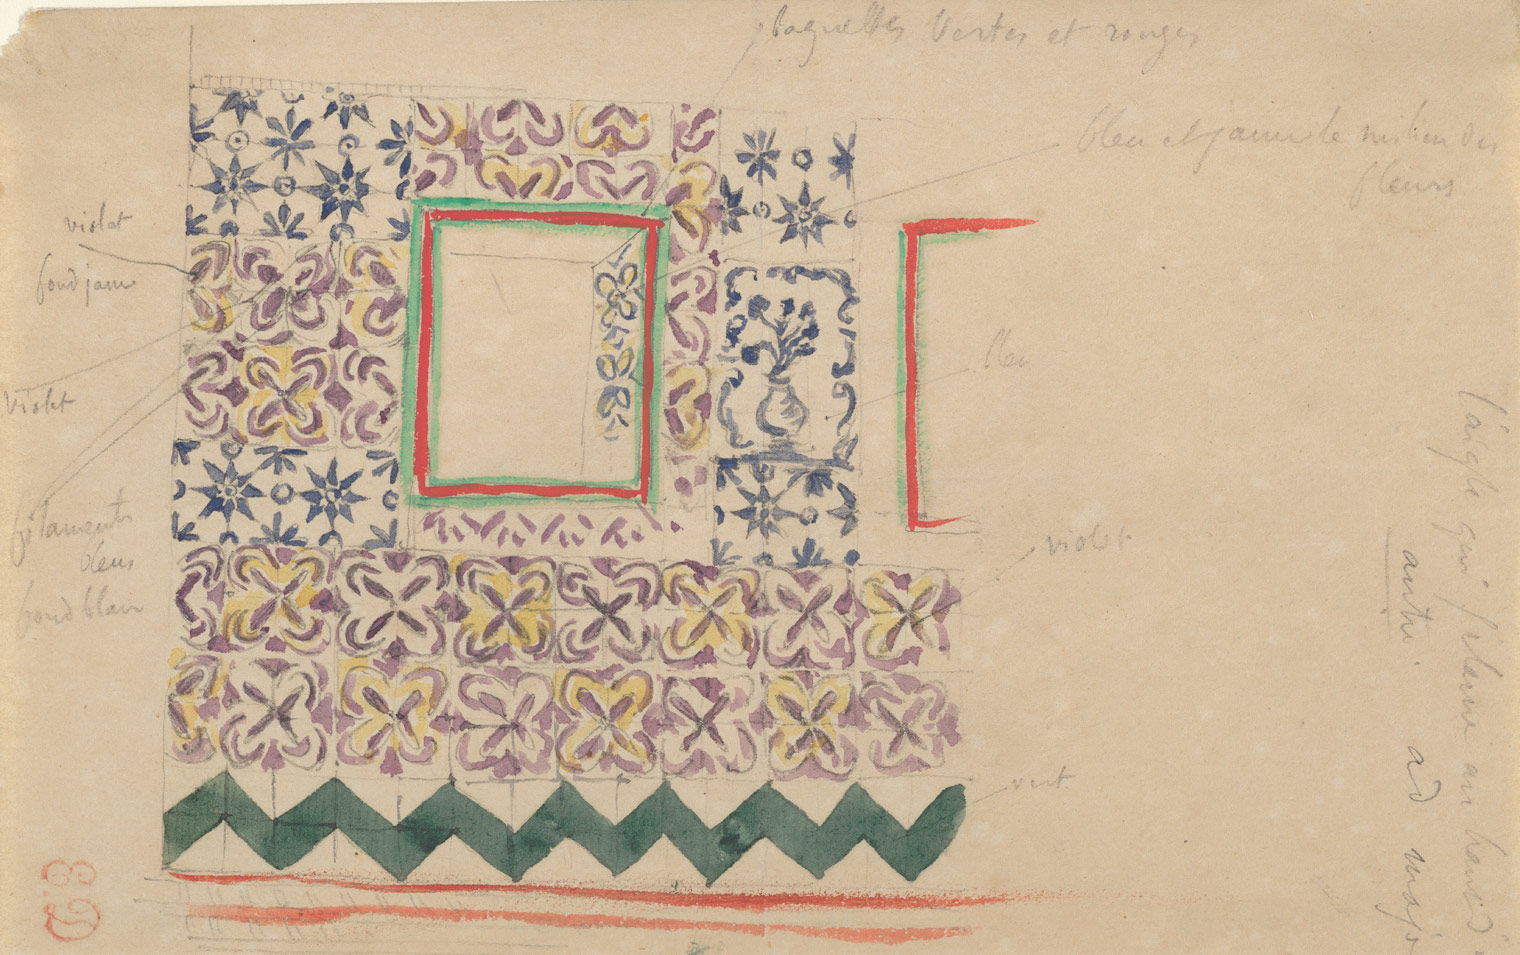 Delacroix drawing of Spanish tiles seen in Morocco